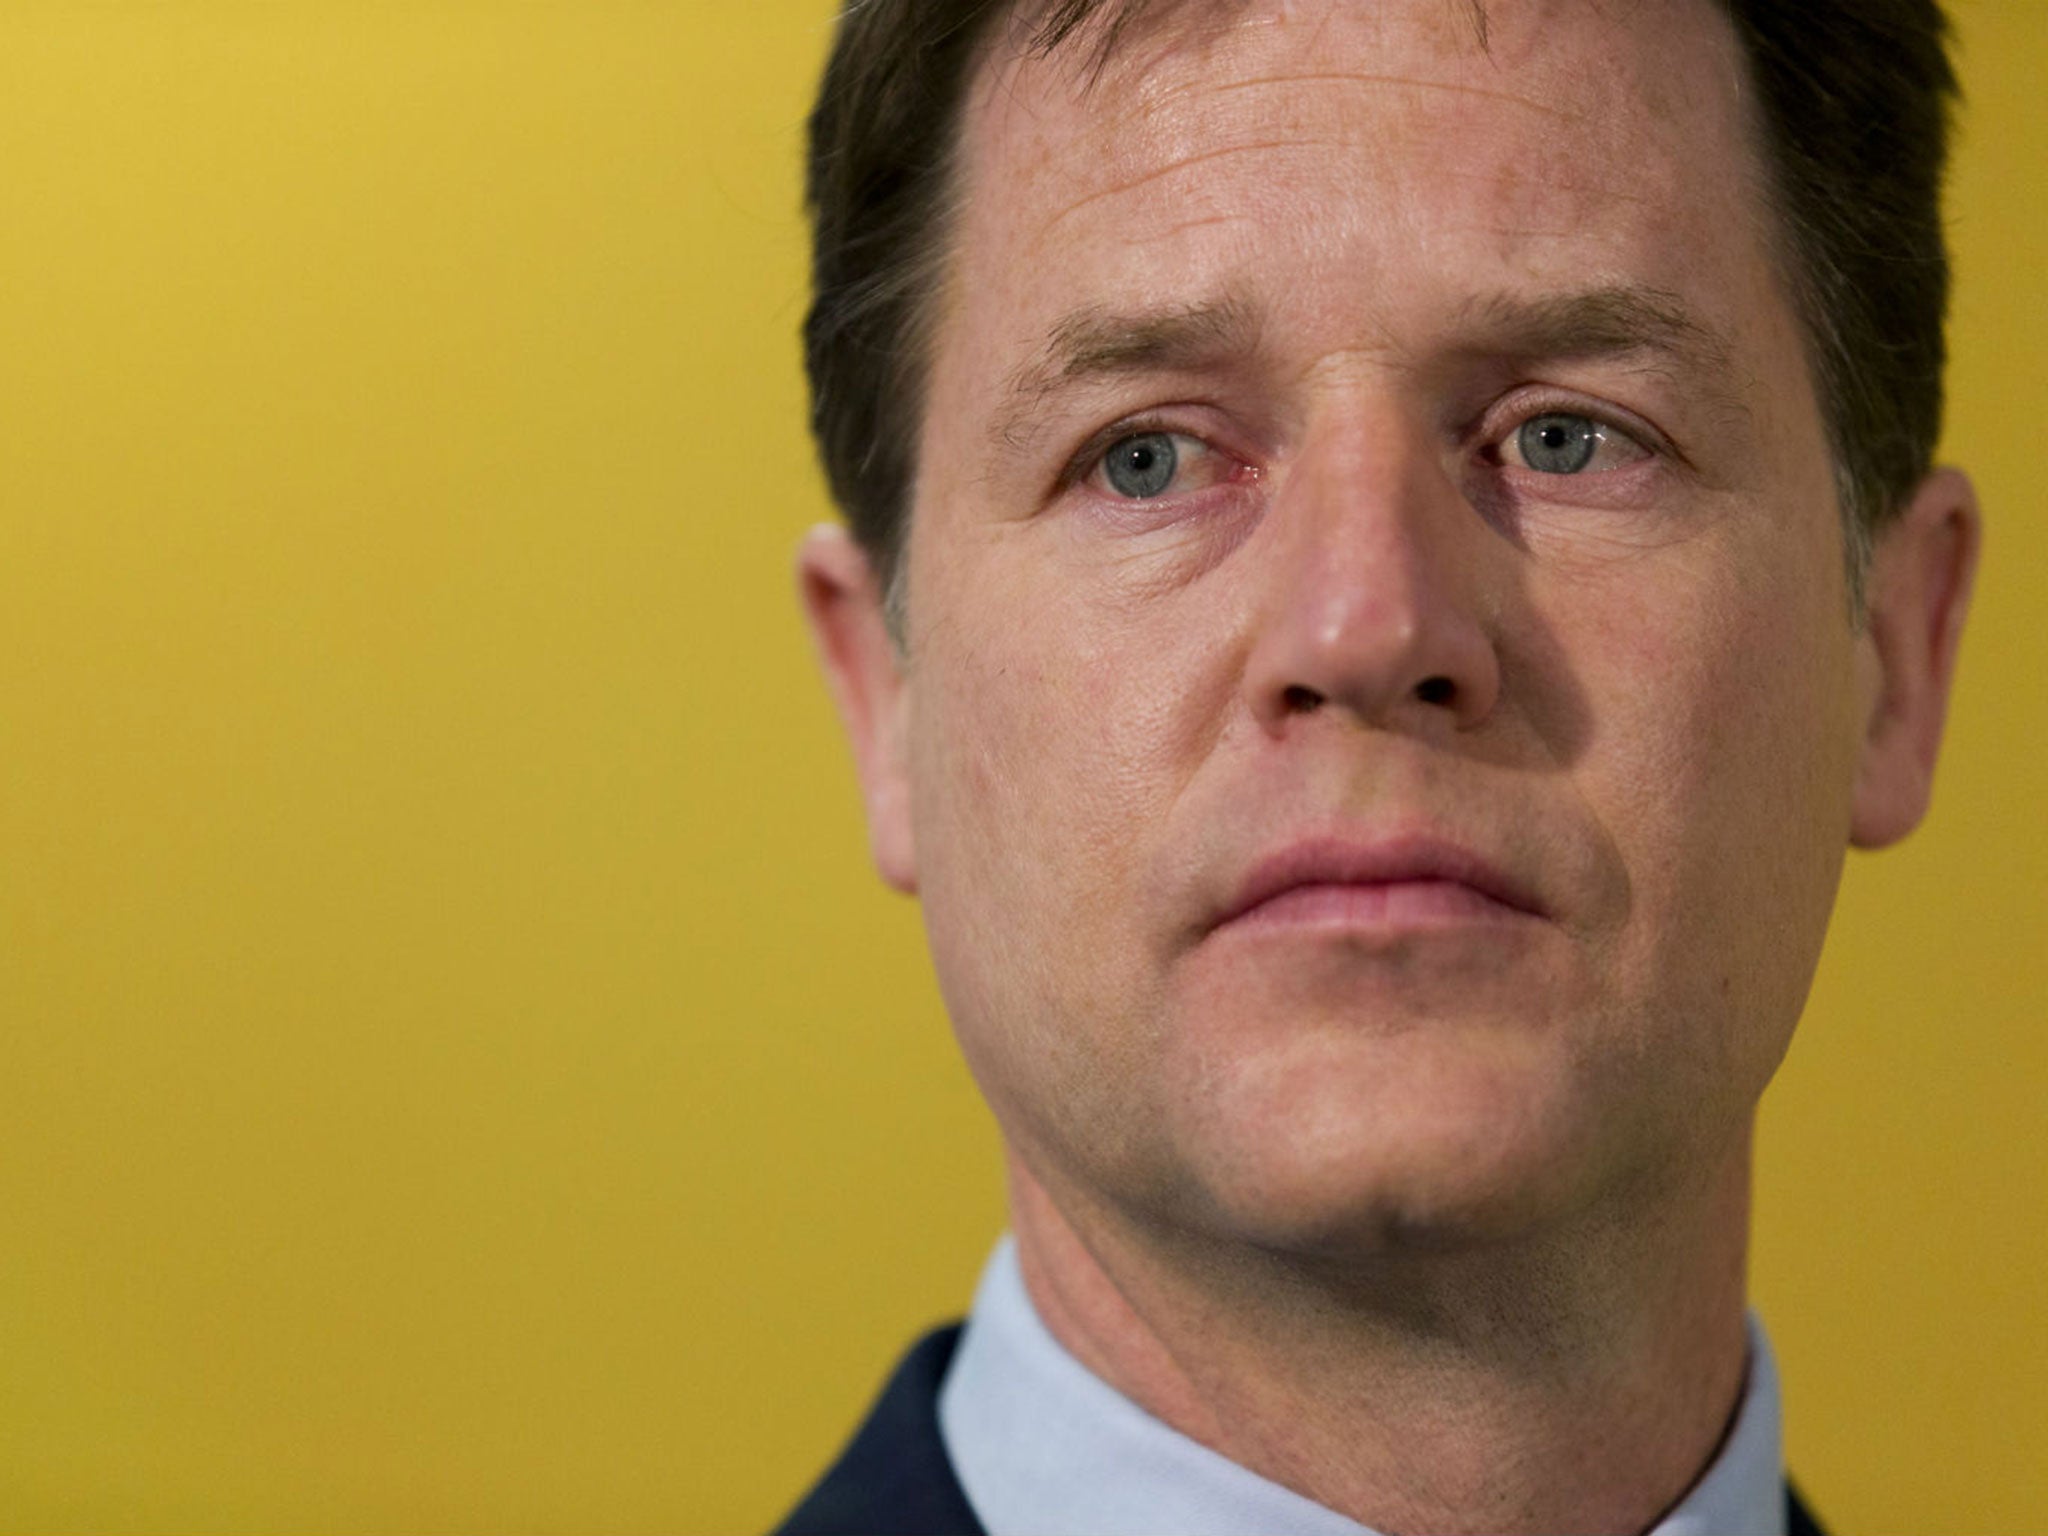 Nick Clegg only decided to stay after canvassing opinion among a number of leading party members